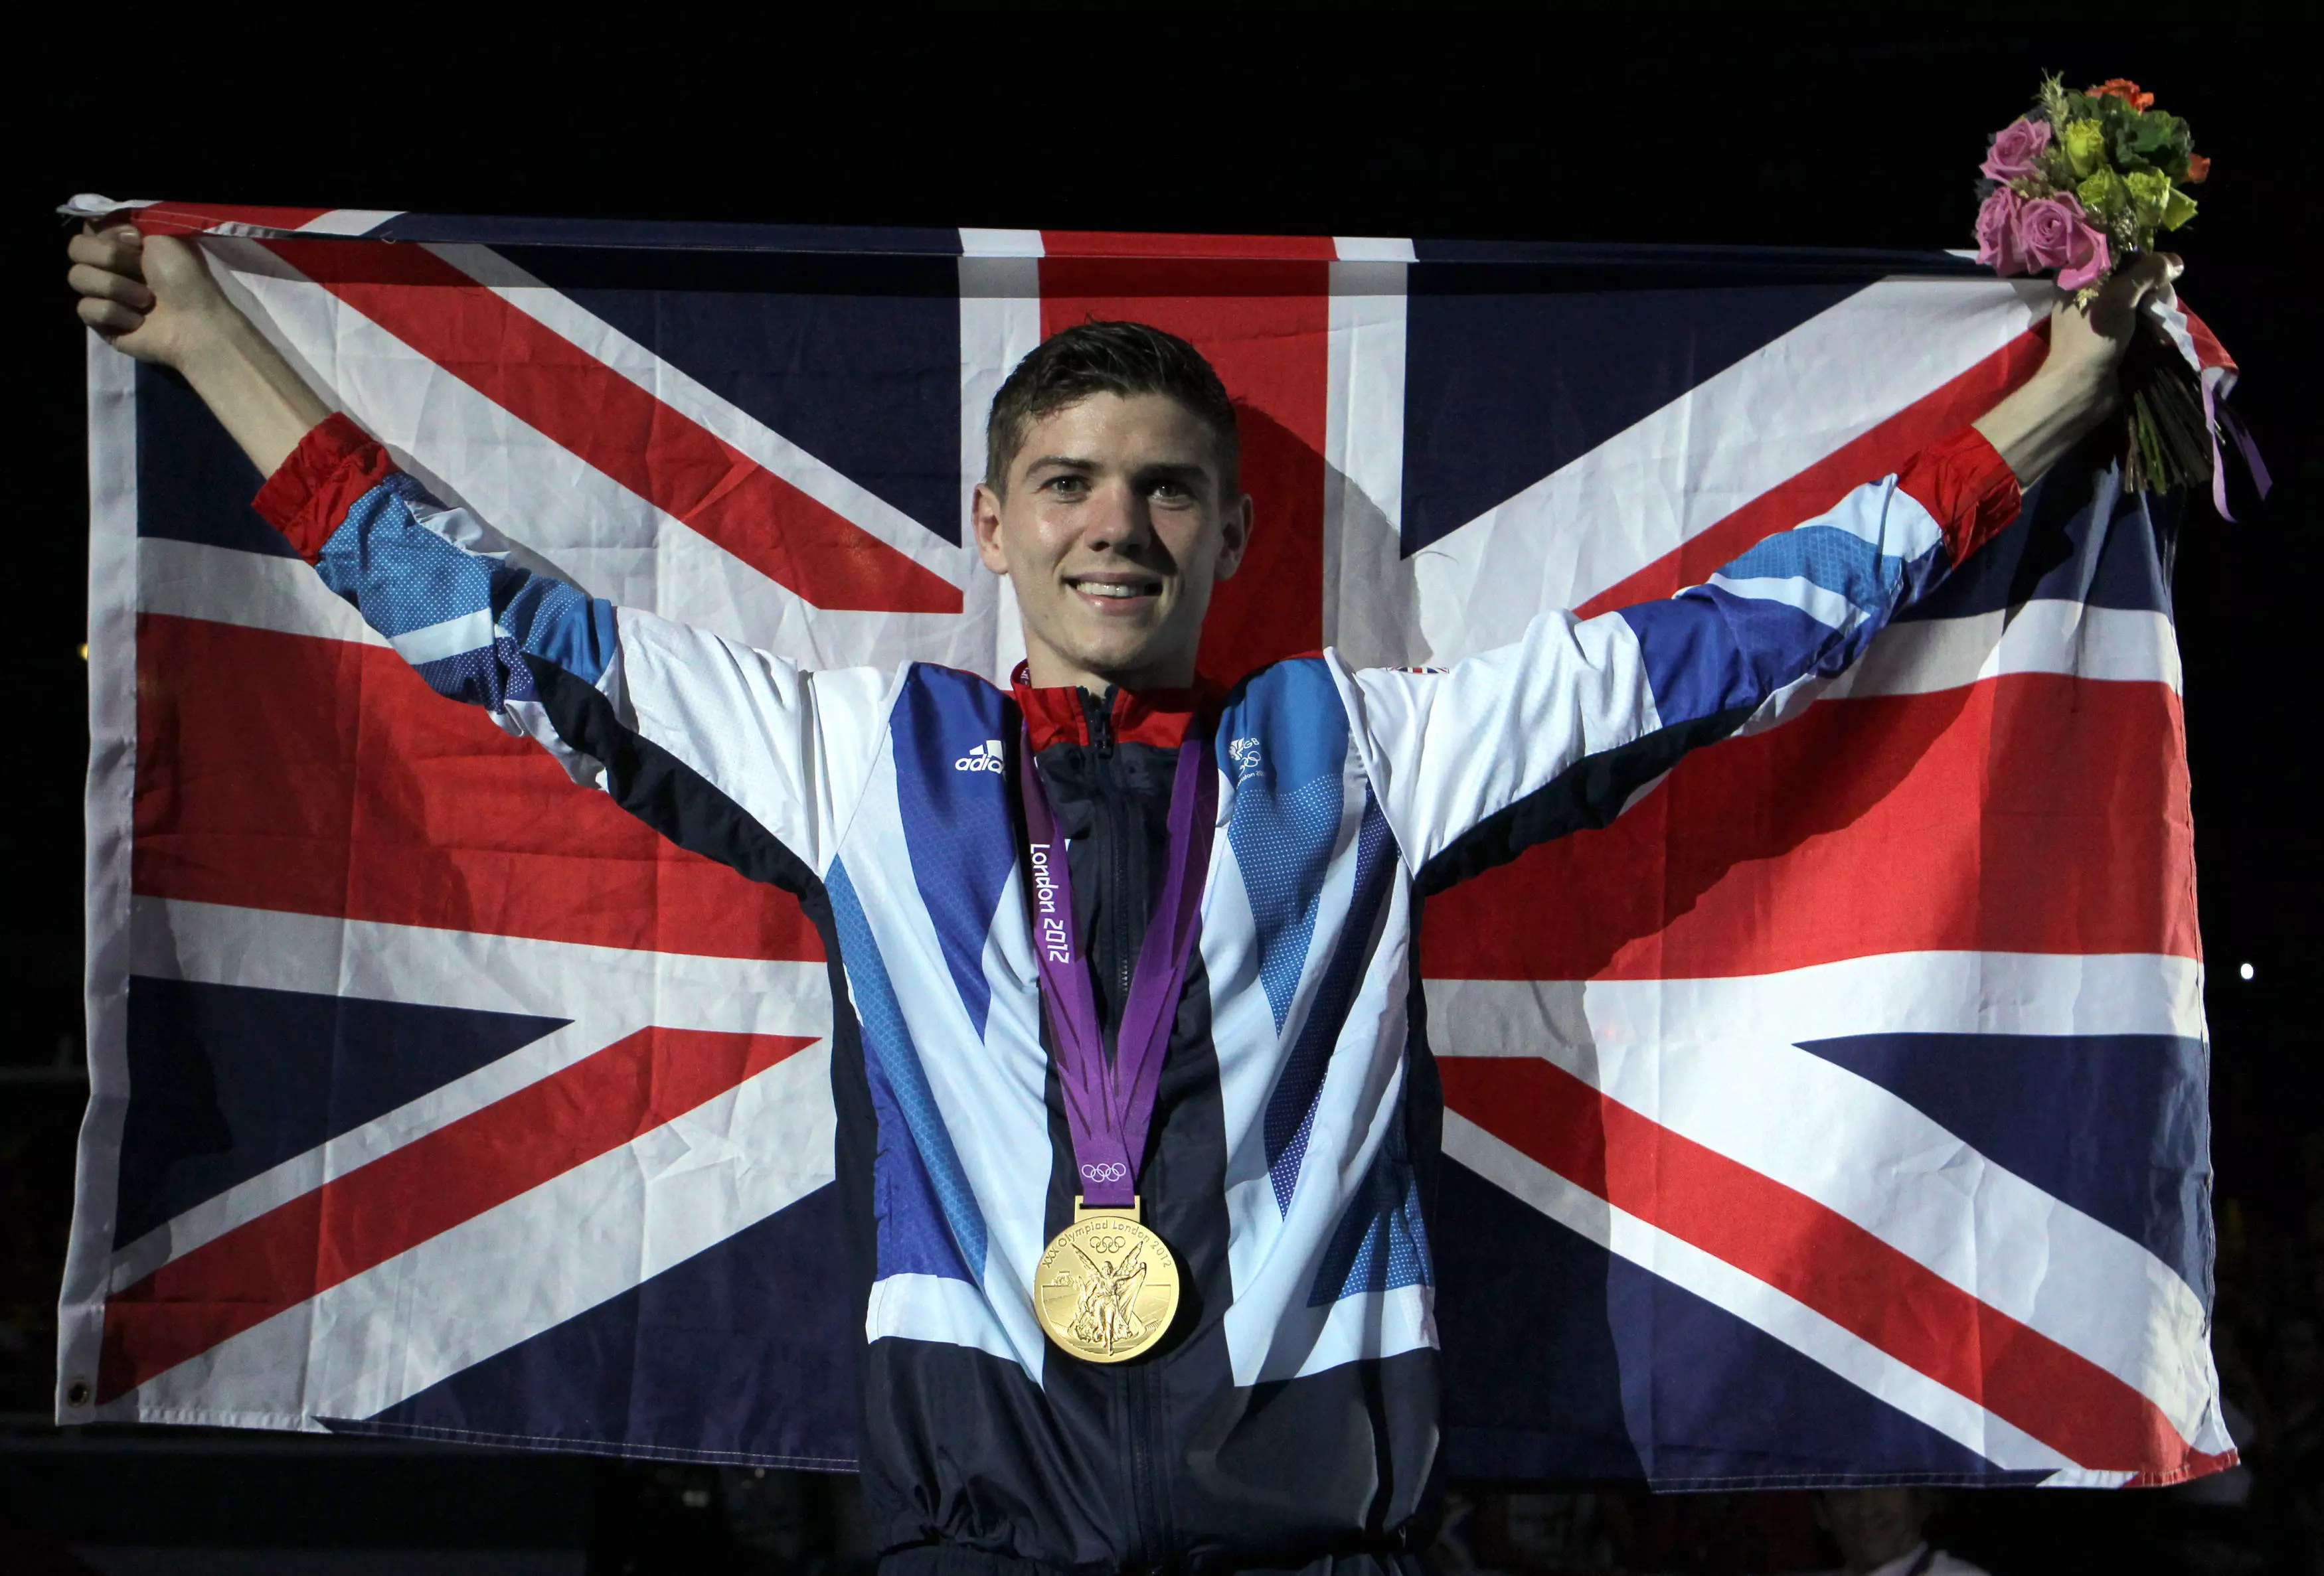 Campbell collects his gold medal at London 2012. Image: PA Images